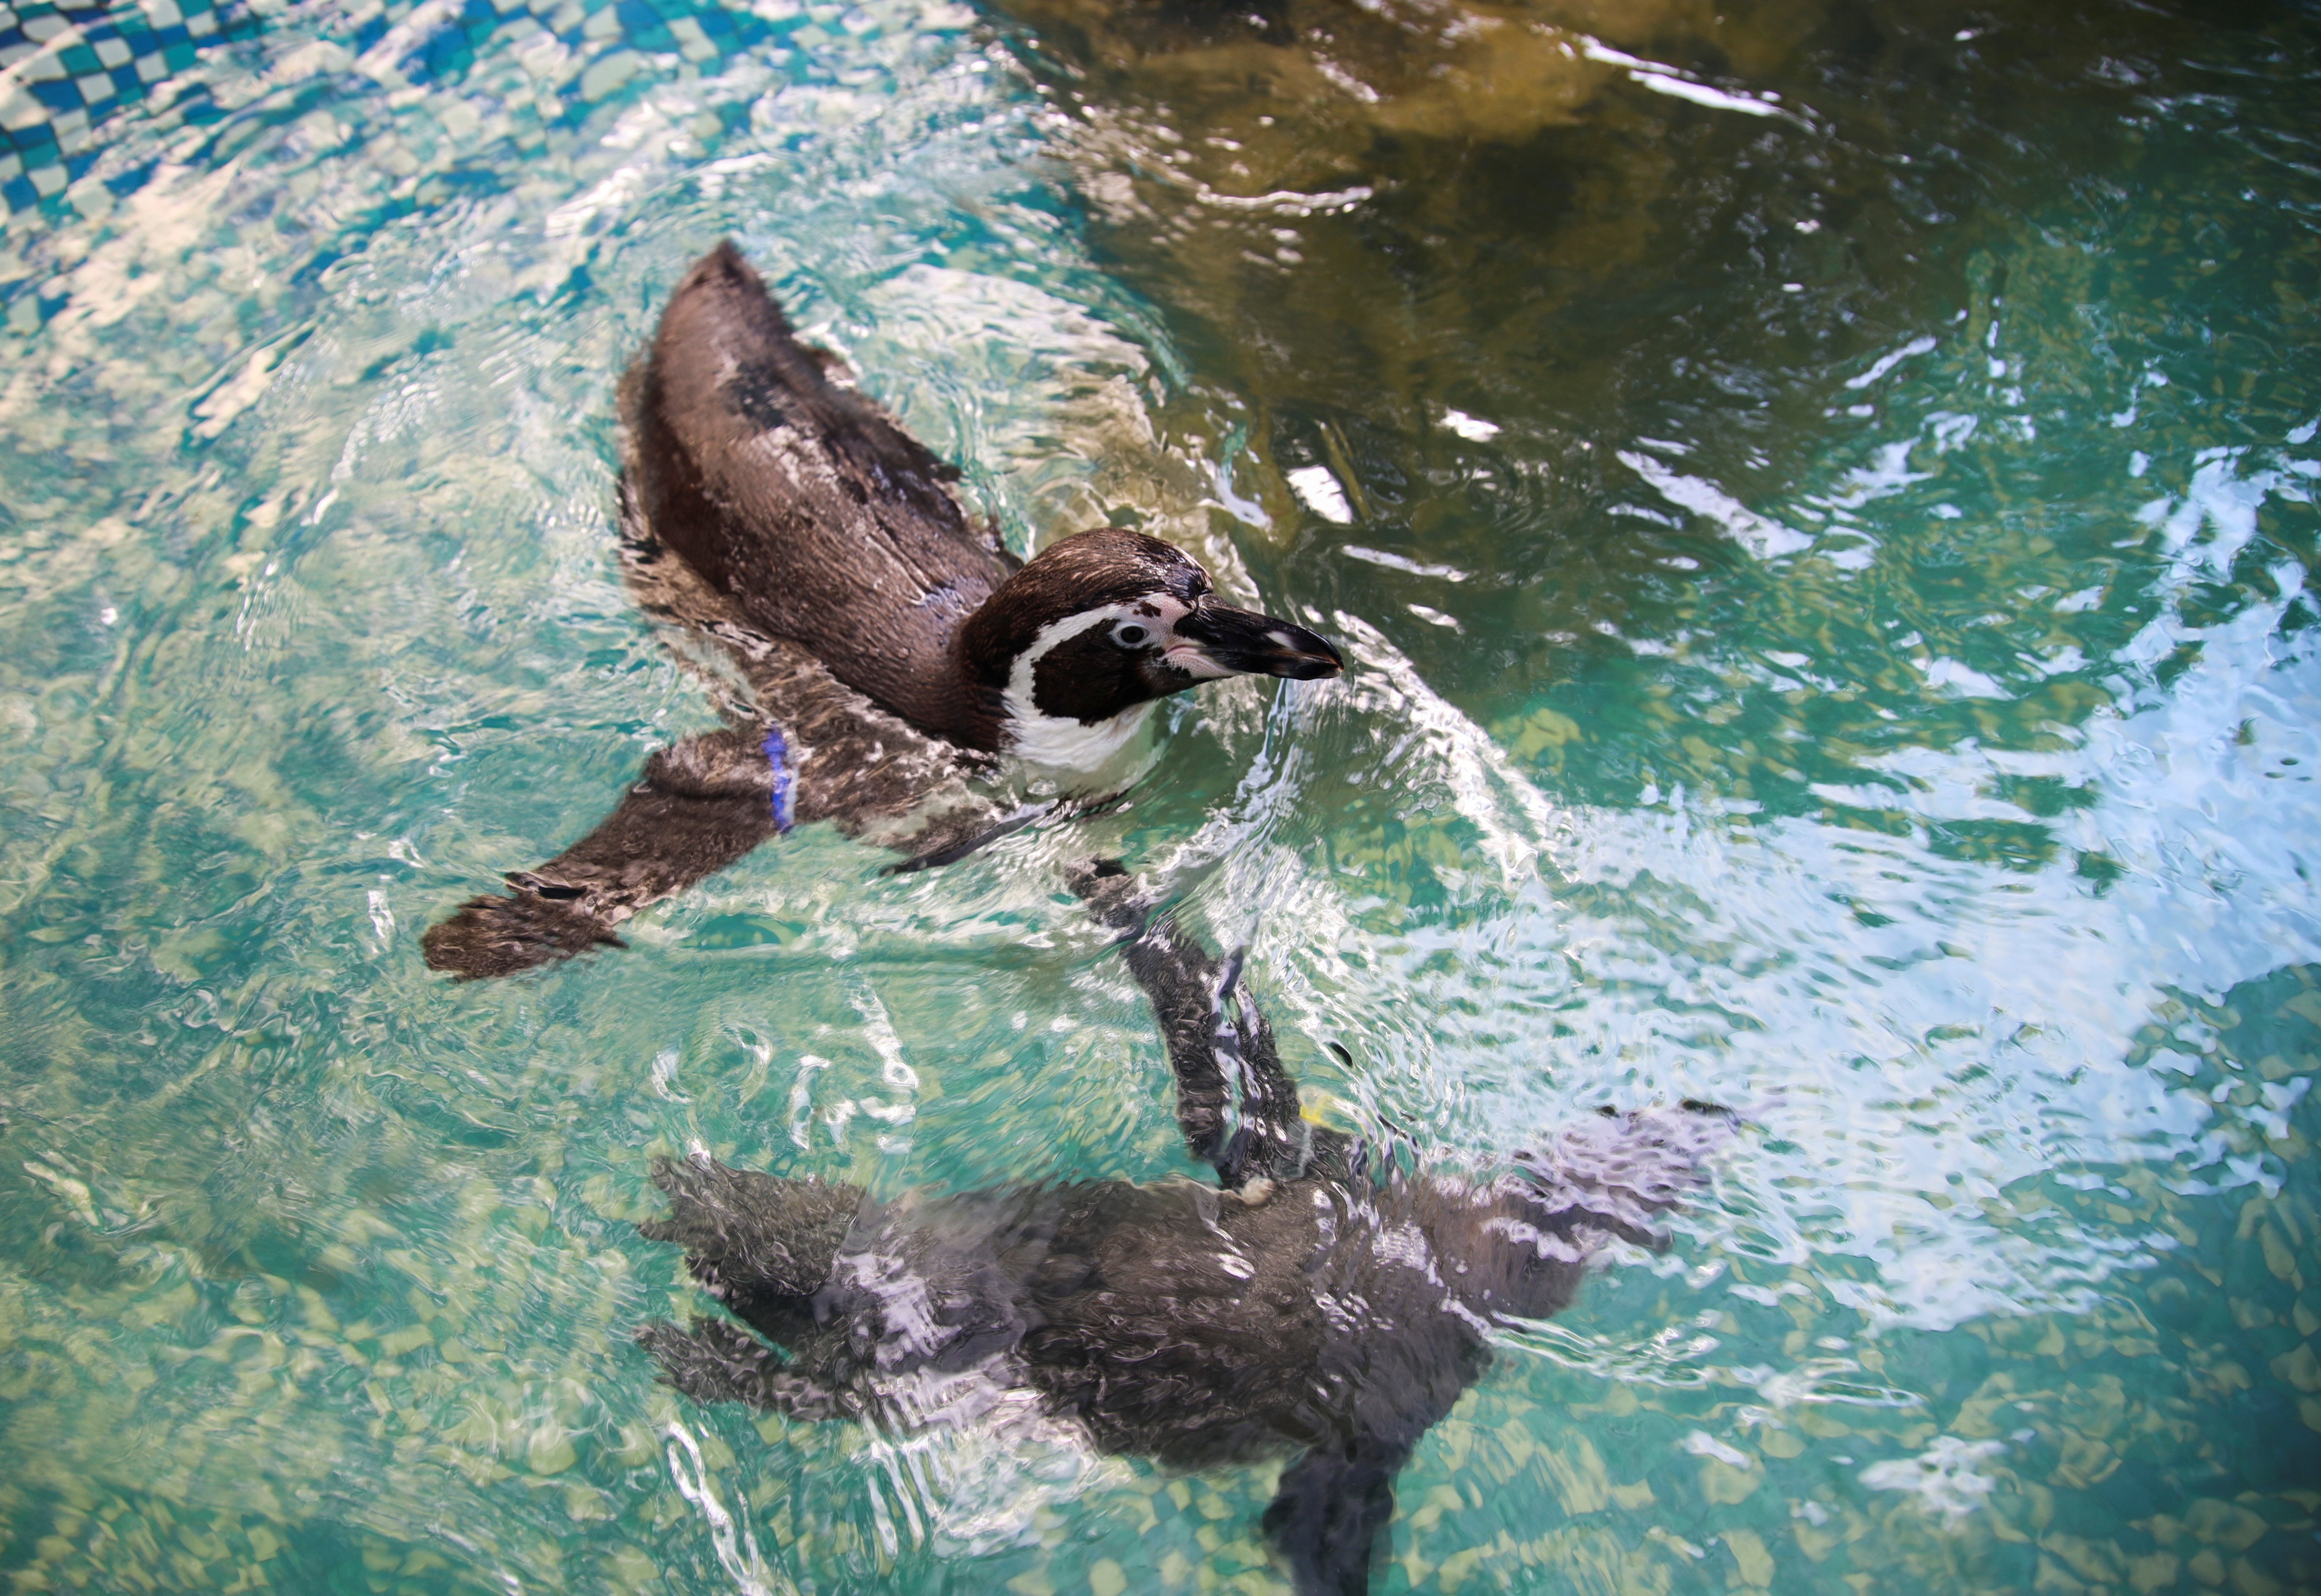 Penguins keep up with their exercise routine at a zoo, in Chonburi